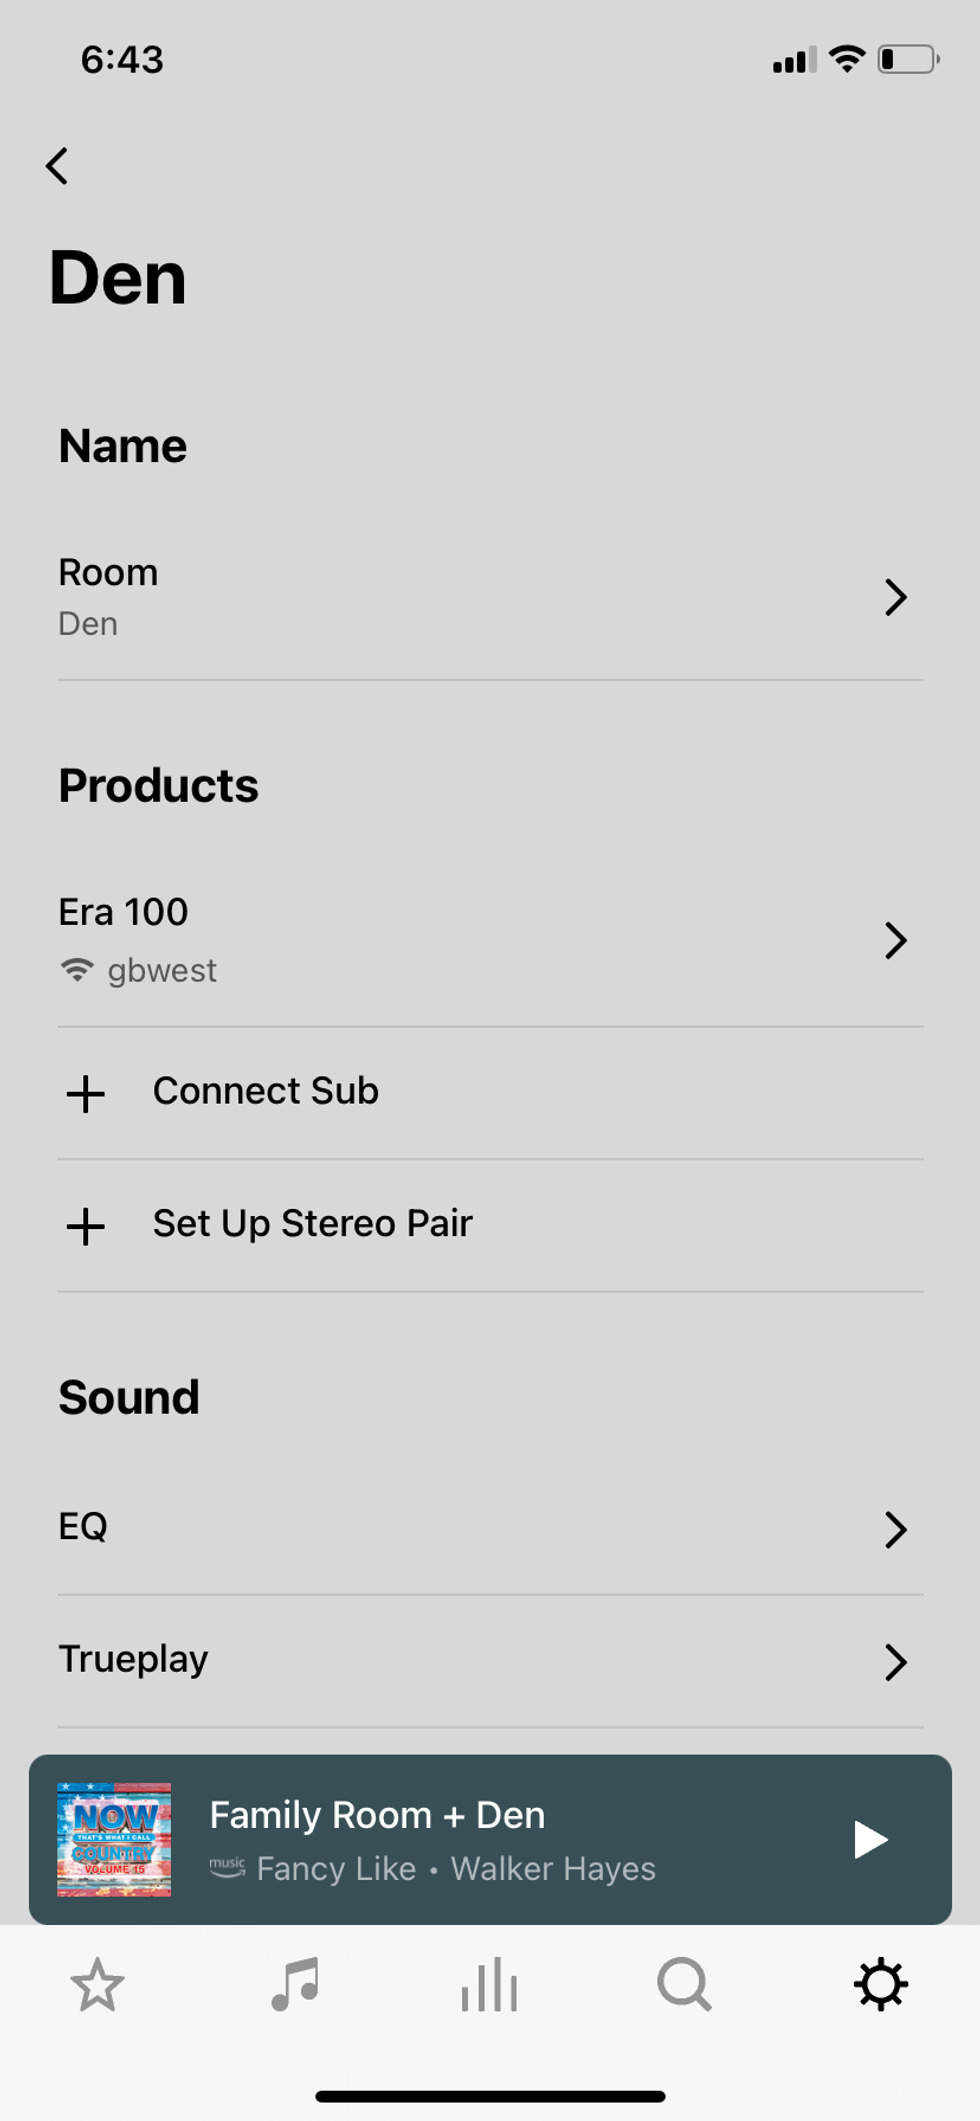 Screenshot of sonos app showing how to control sound for your Sonos speaker